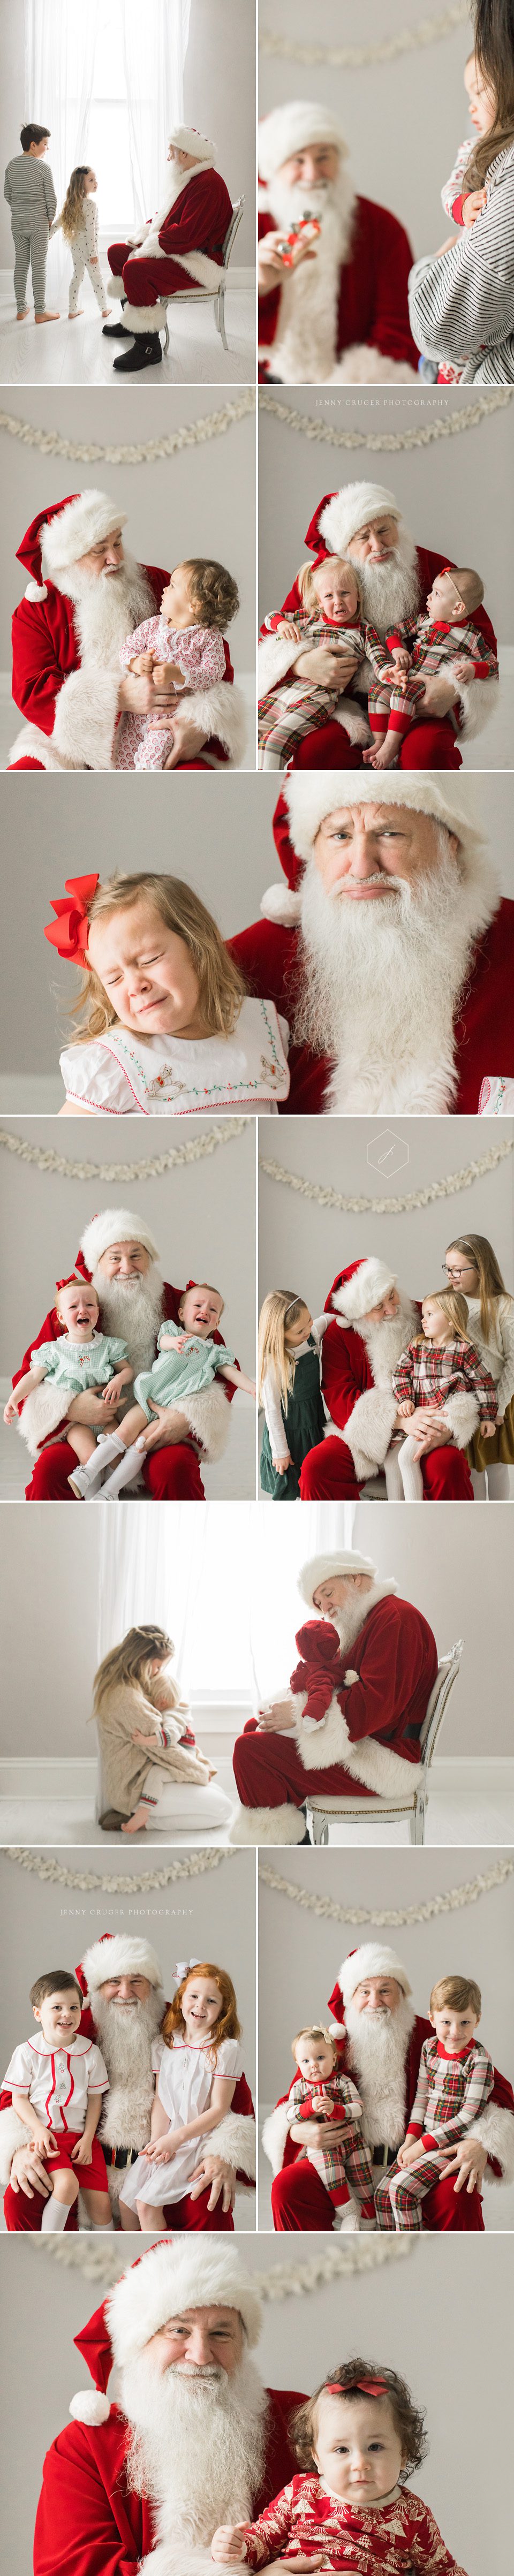 Ginger-Snapped: a Santa Experience with CoolSprings Galleria